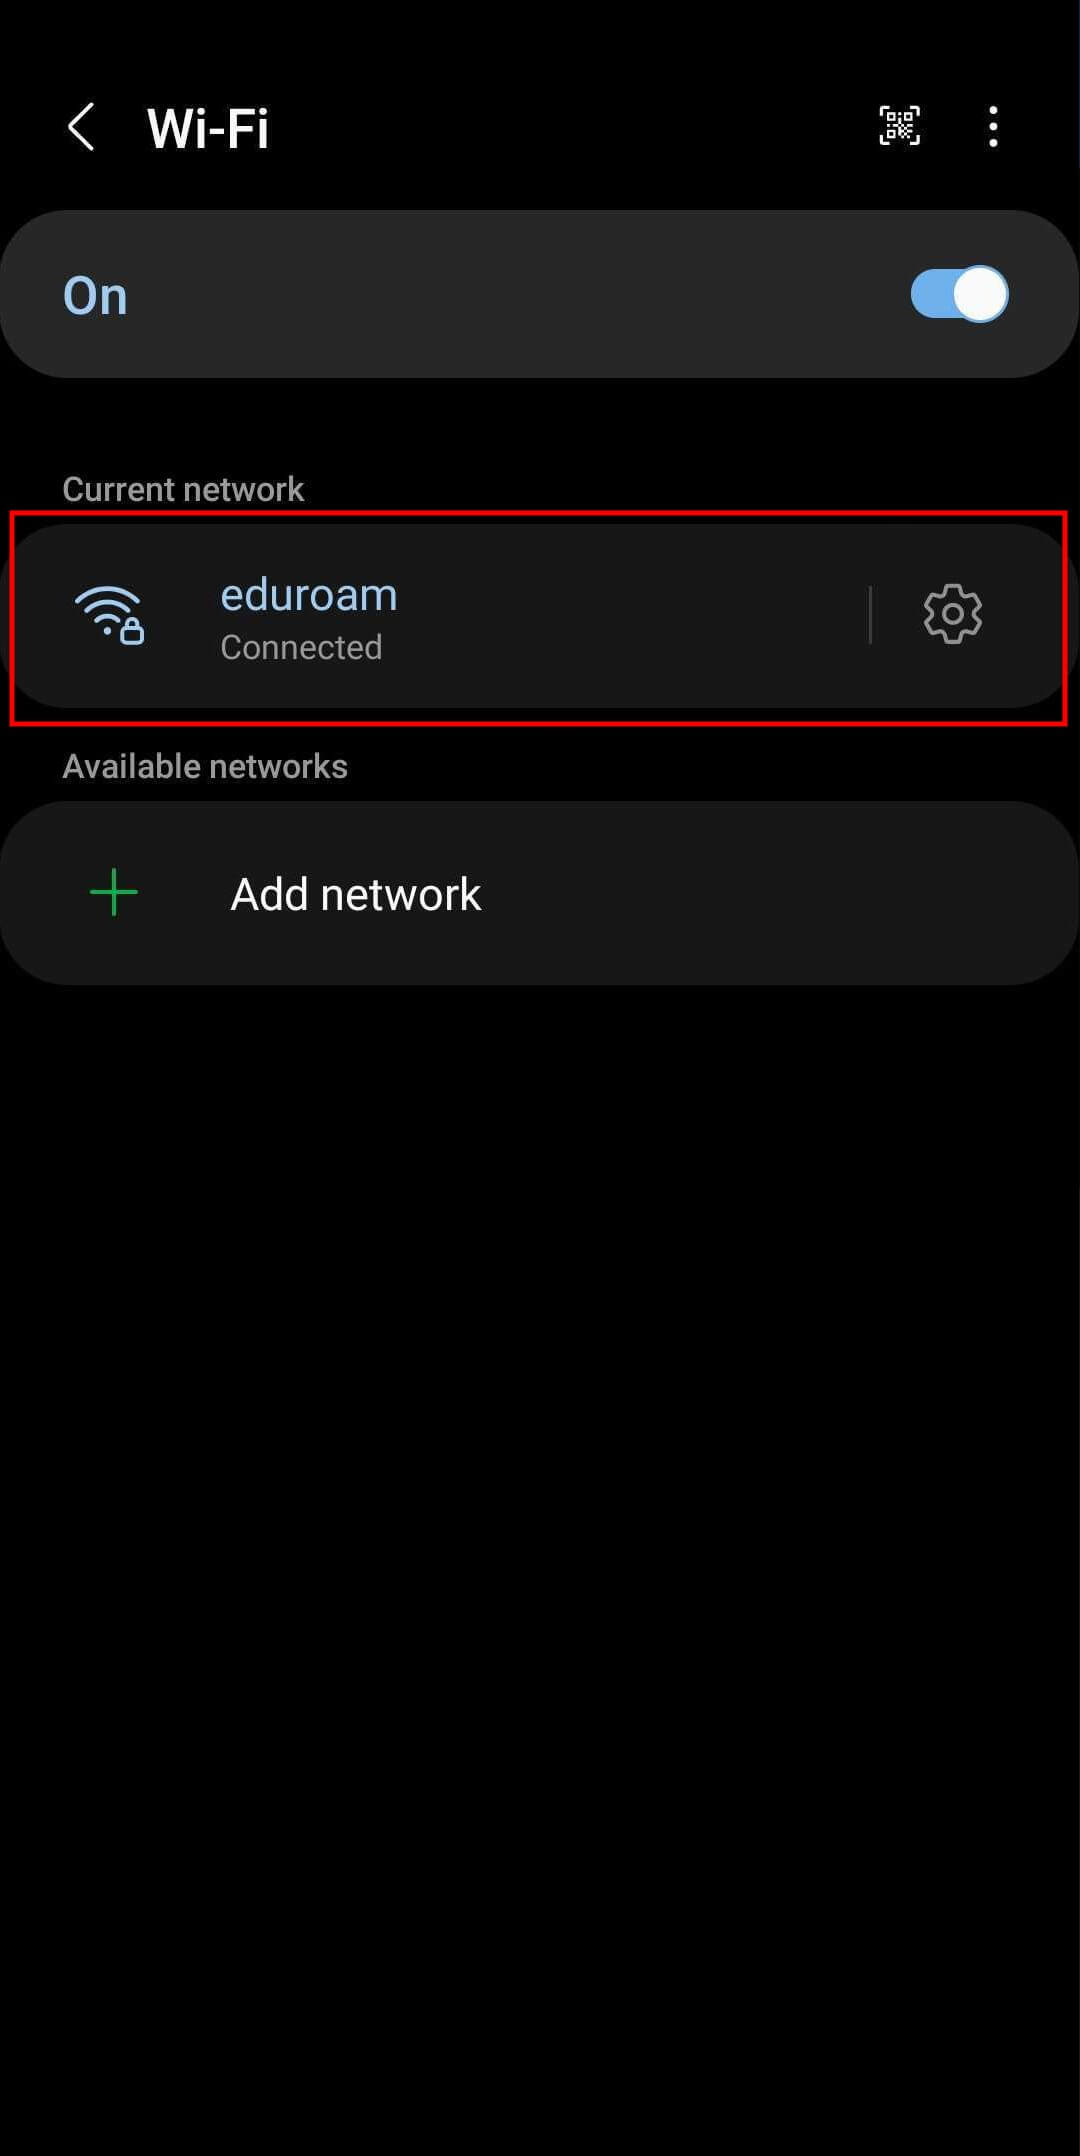 A screenshot of the Wi-Fi settings for an Android device. Eduroam is a listed network, and its status is 'Connected.'